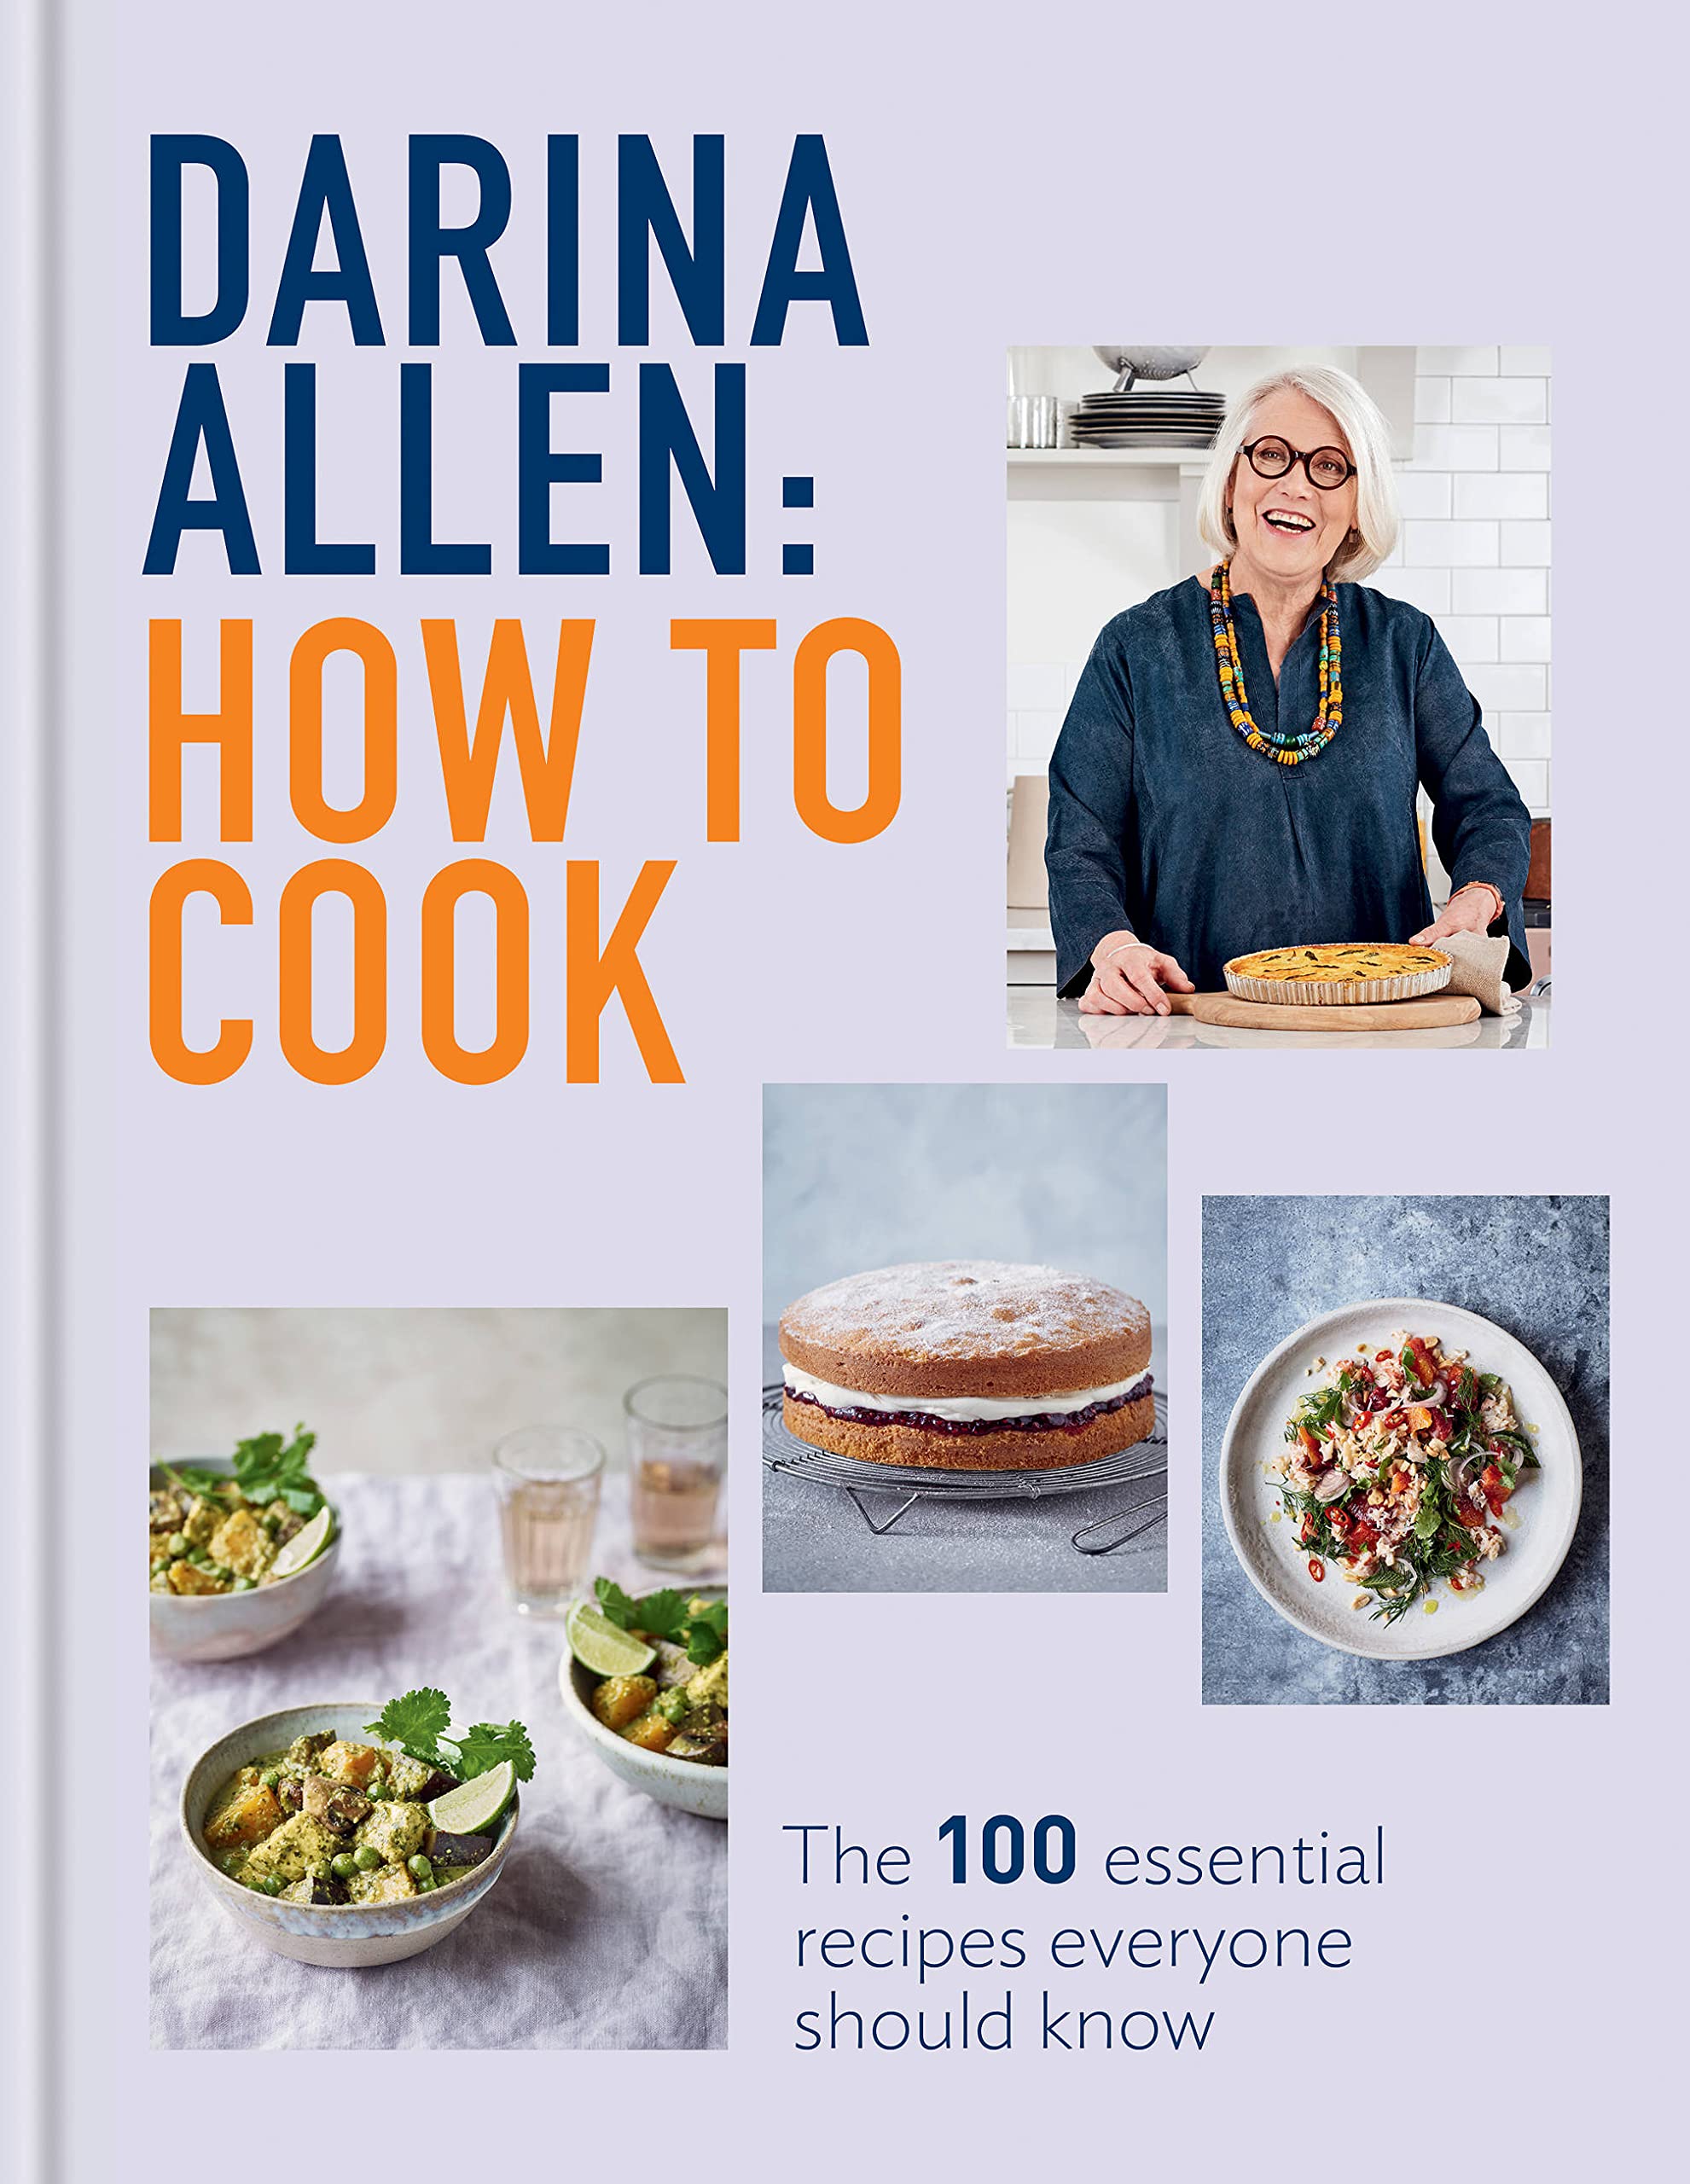 How to Cook: The 100 Essential Recipes Everyone Should Know (Darina Allen)